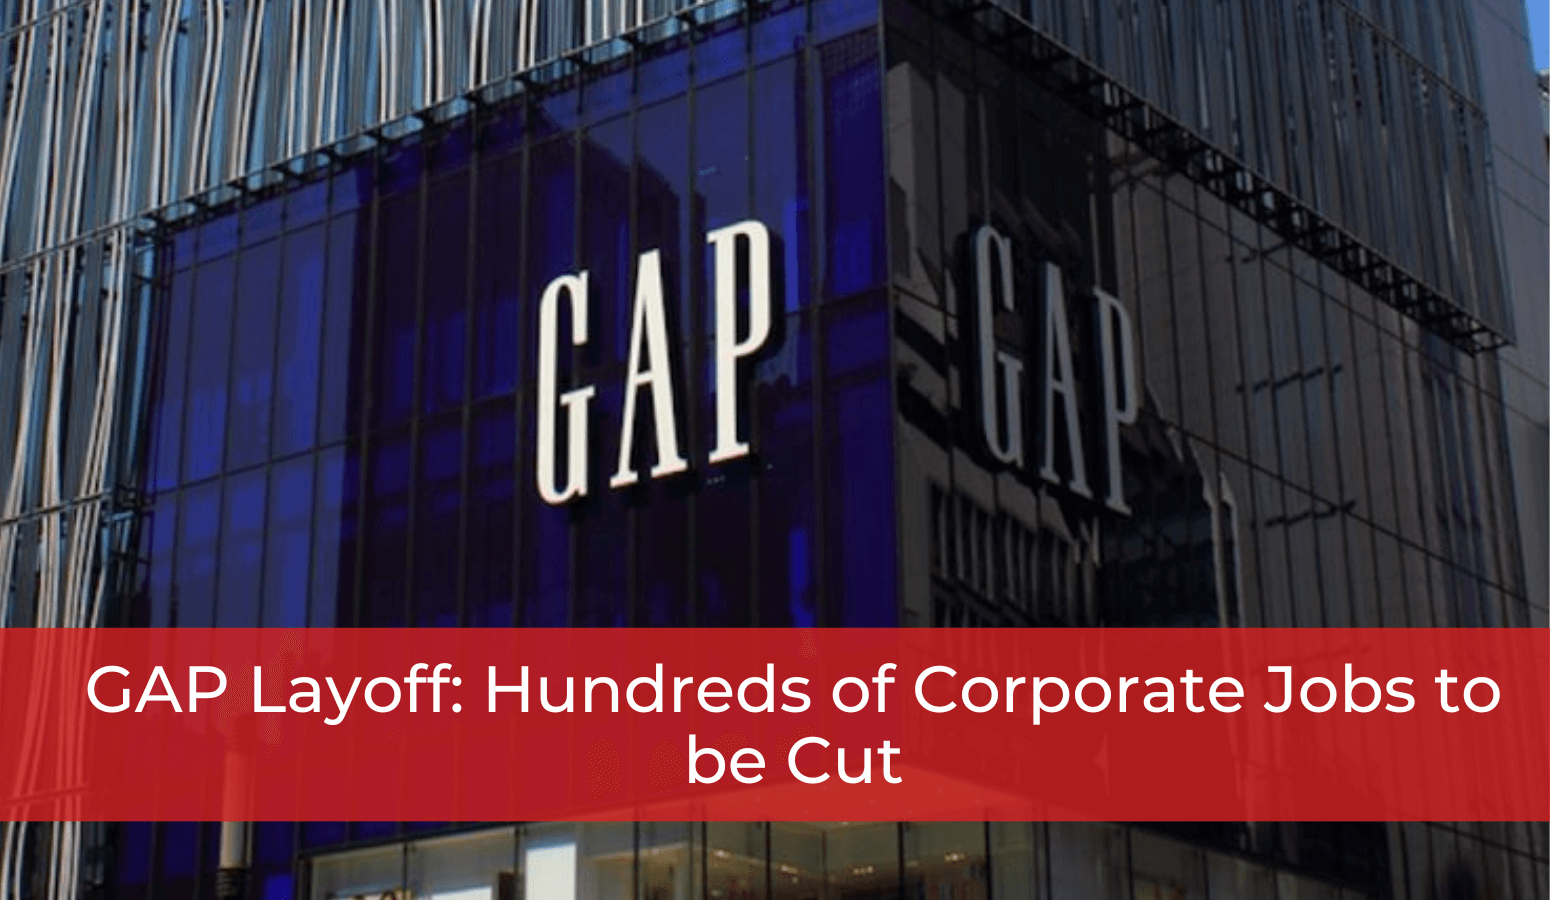 Featured image for “GAP Layoff: Hundreds of Corporate Jobs to be Cut”